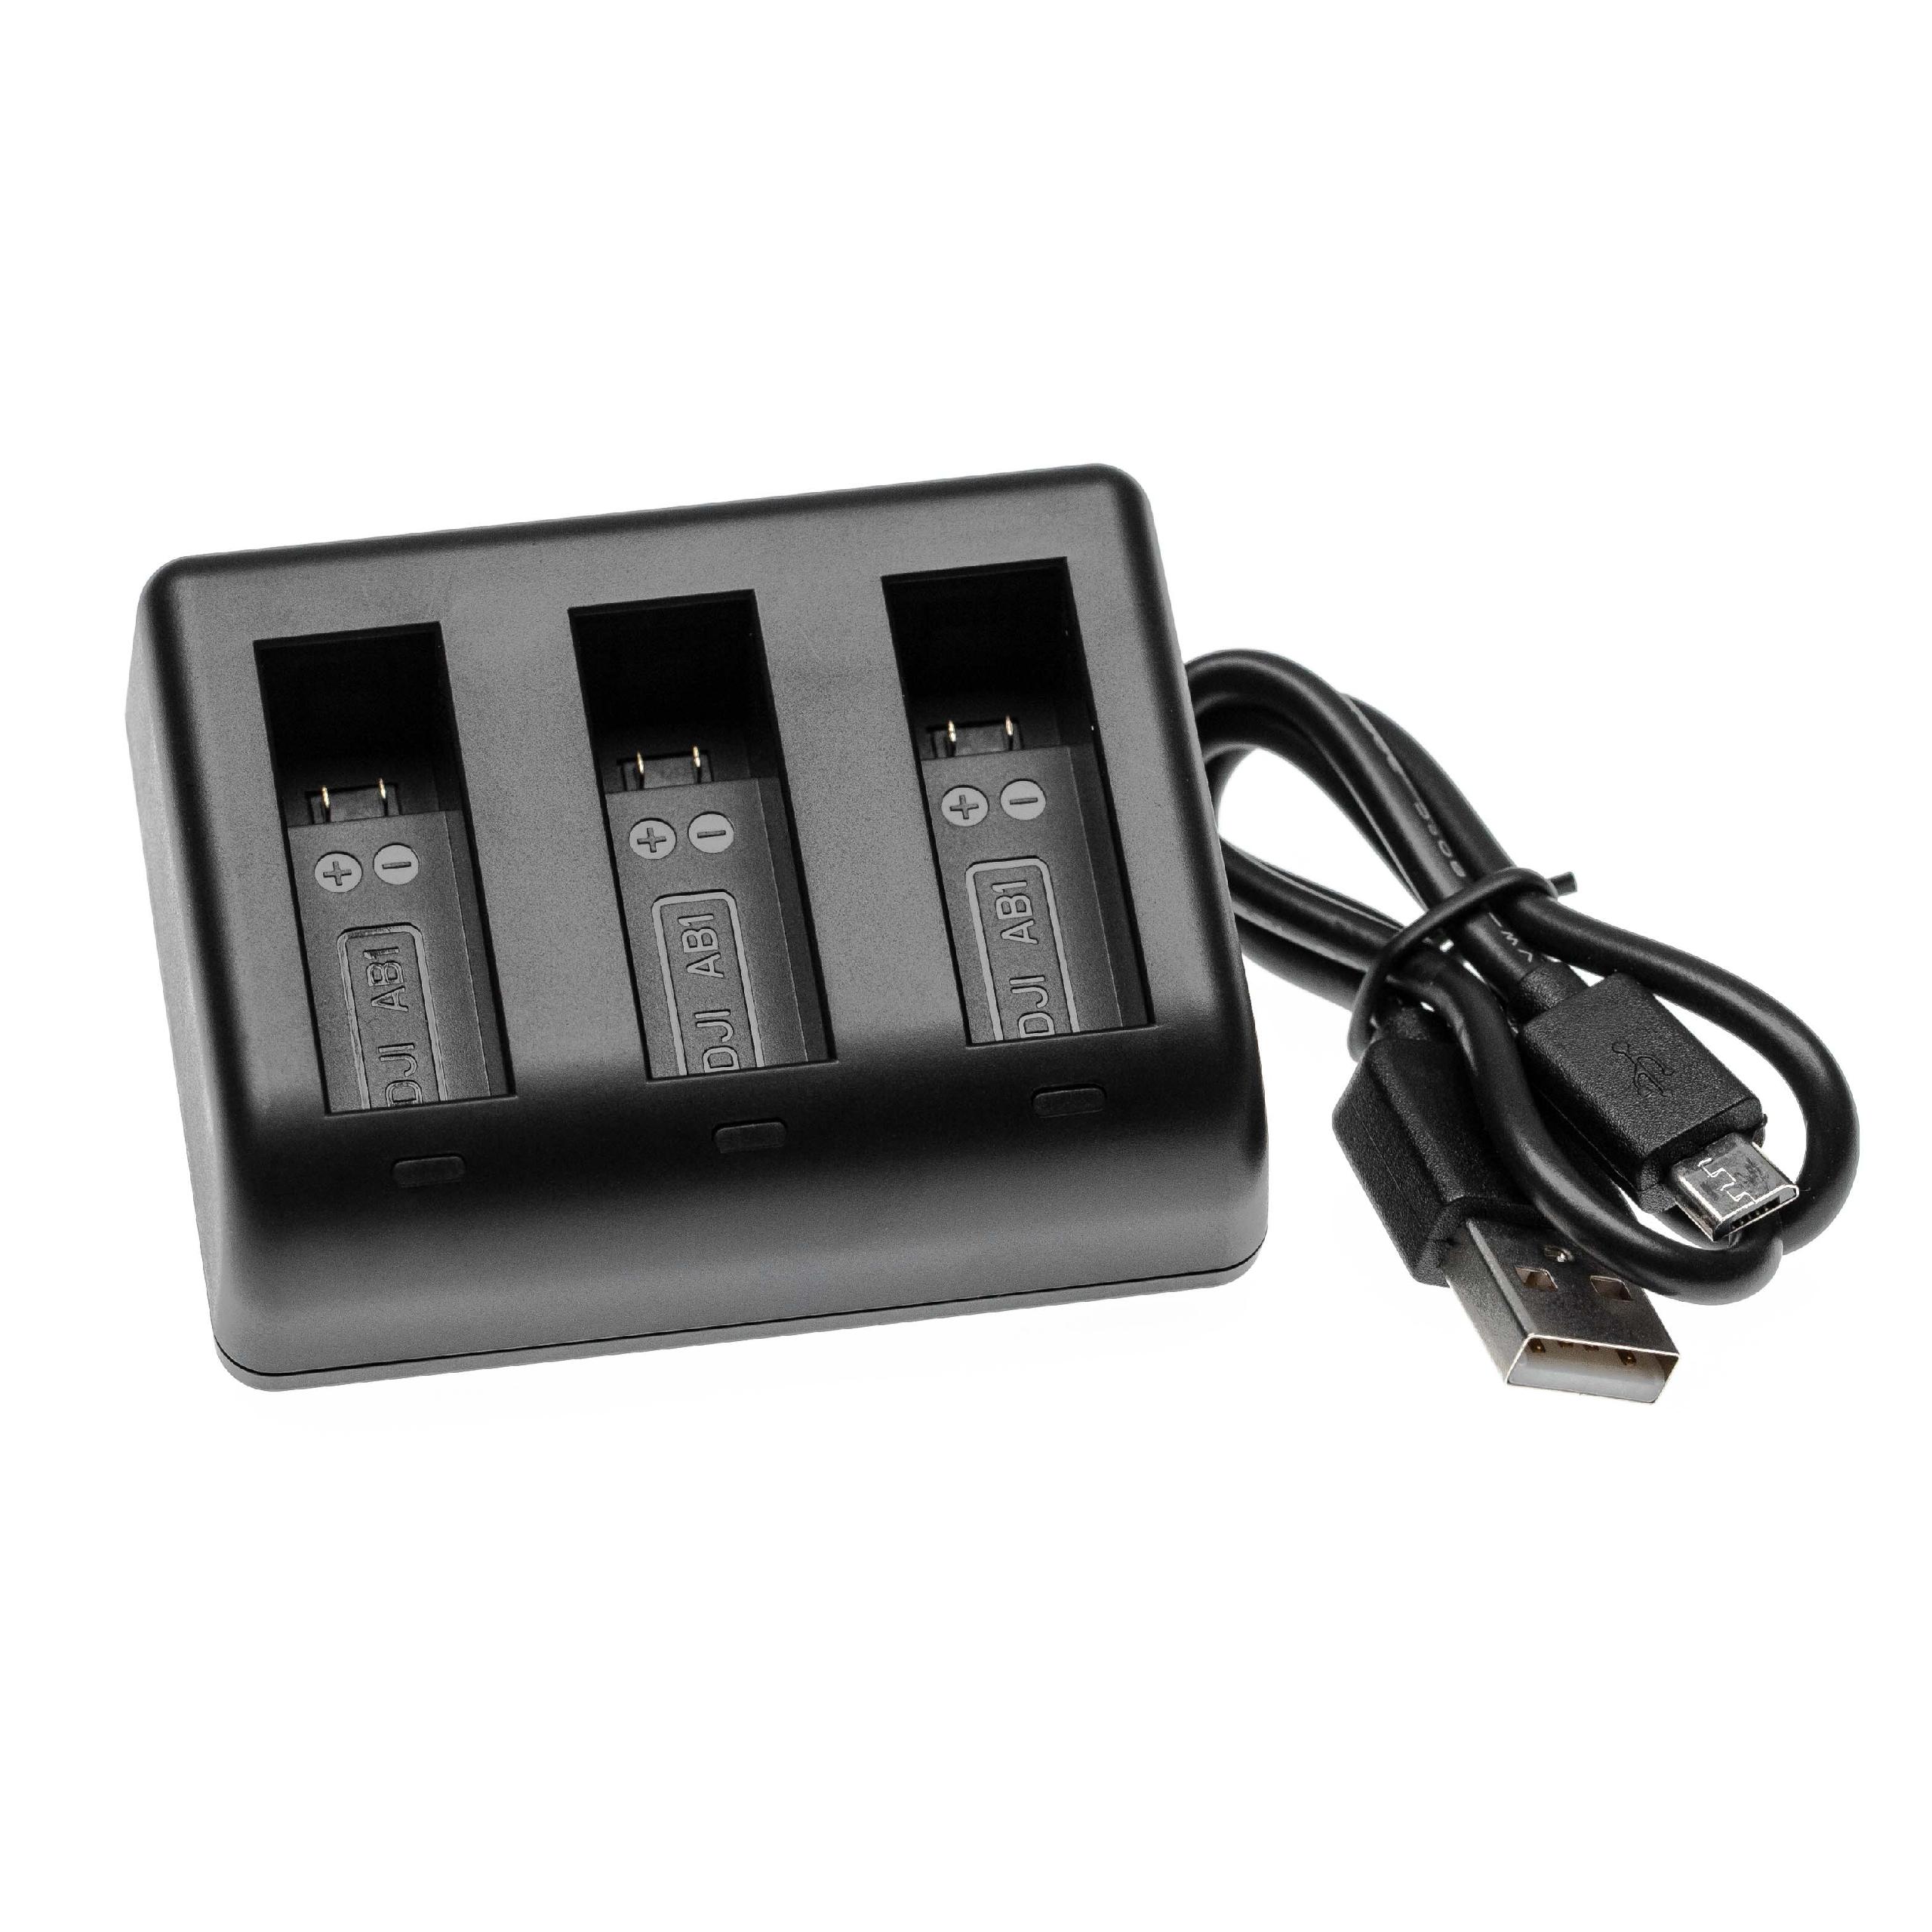 Battery Charger suitable for DJI AB1 Camera etc. - 0.7 A, 4.35 V